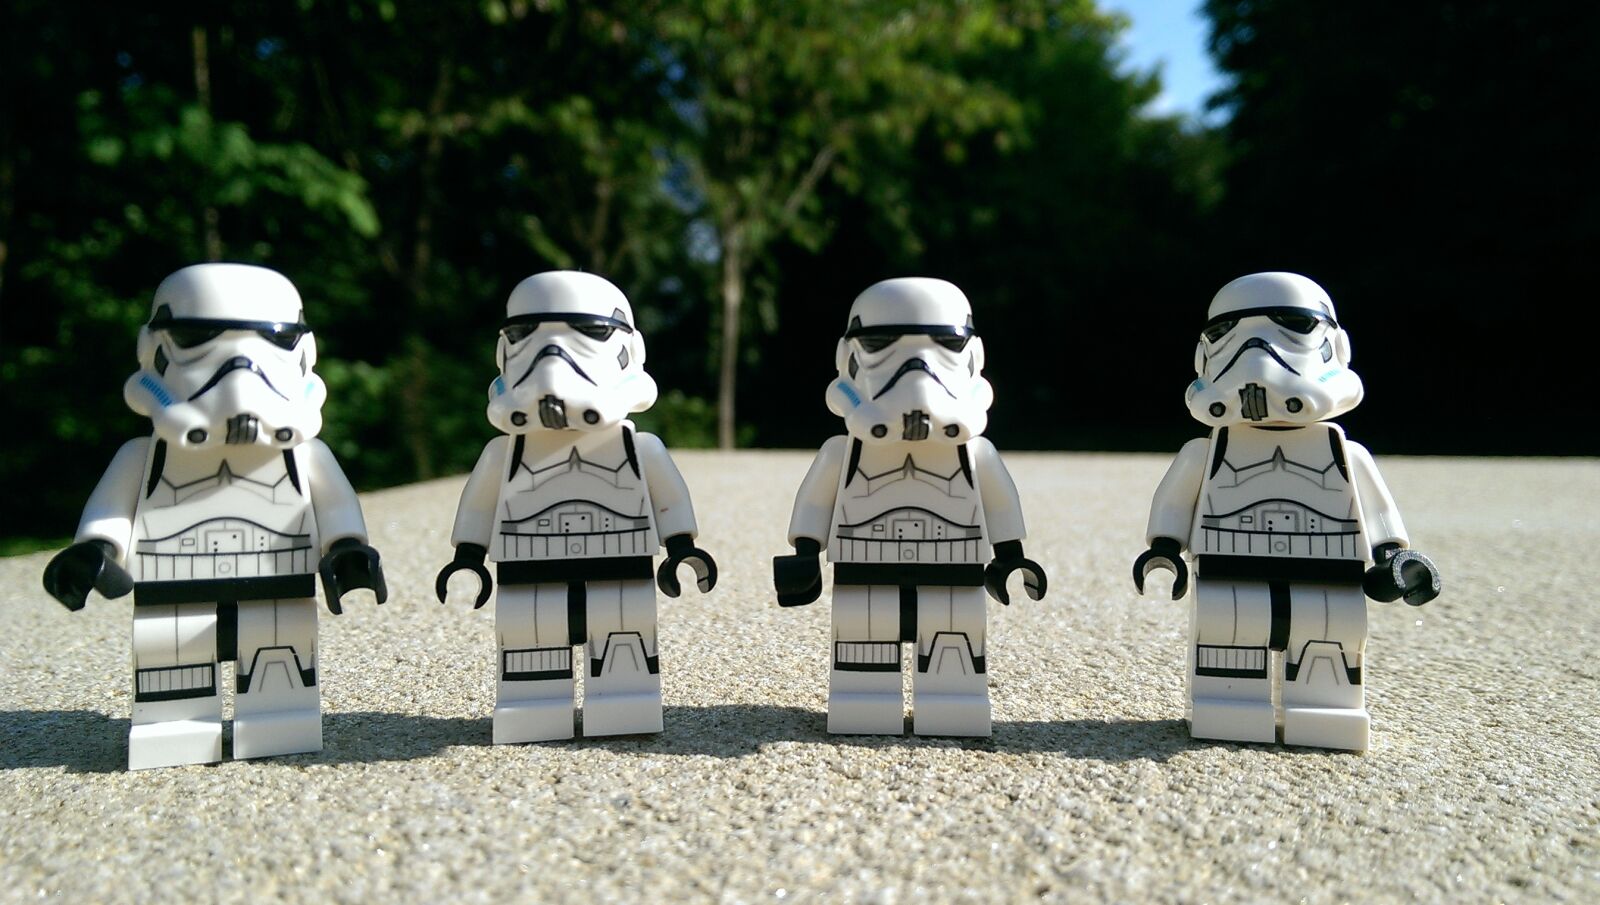 HTC ONE MINI sample photo. Lego, stormtroopers, toys photography